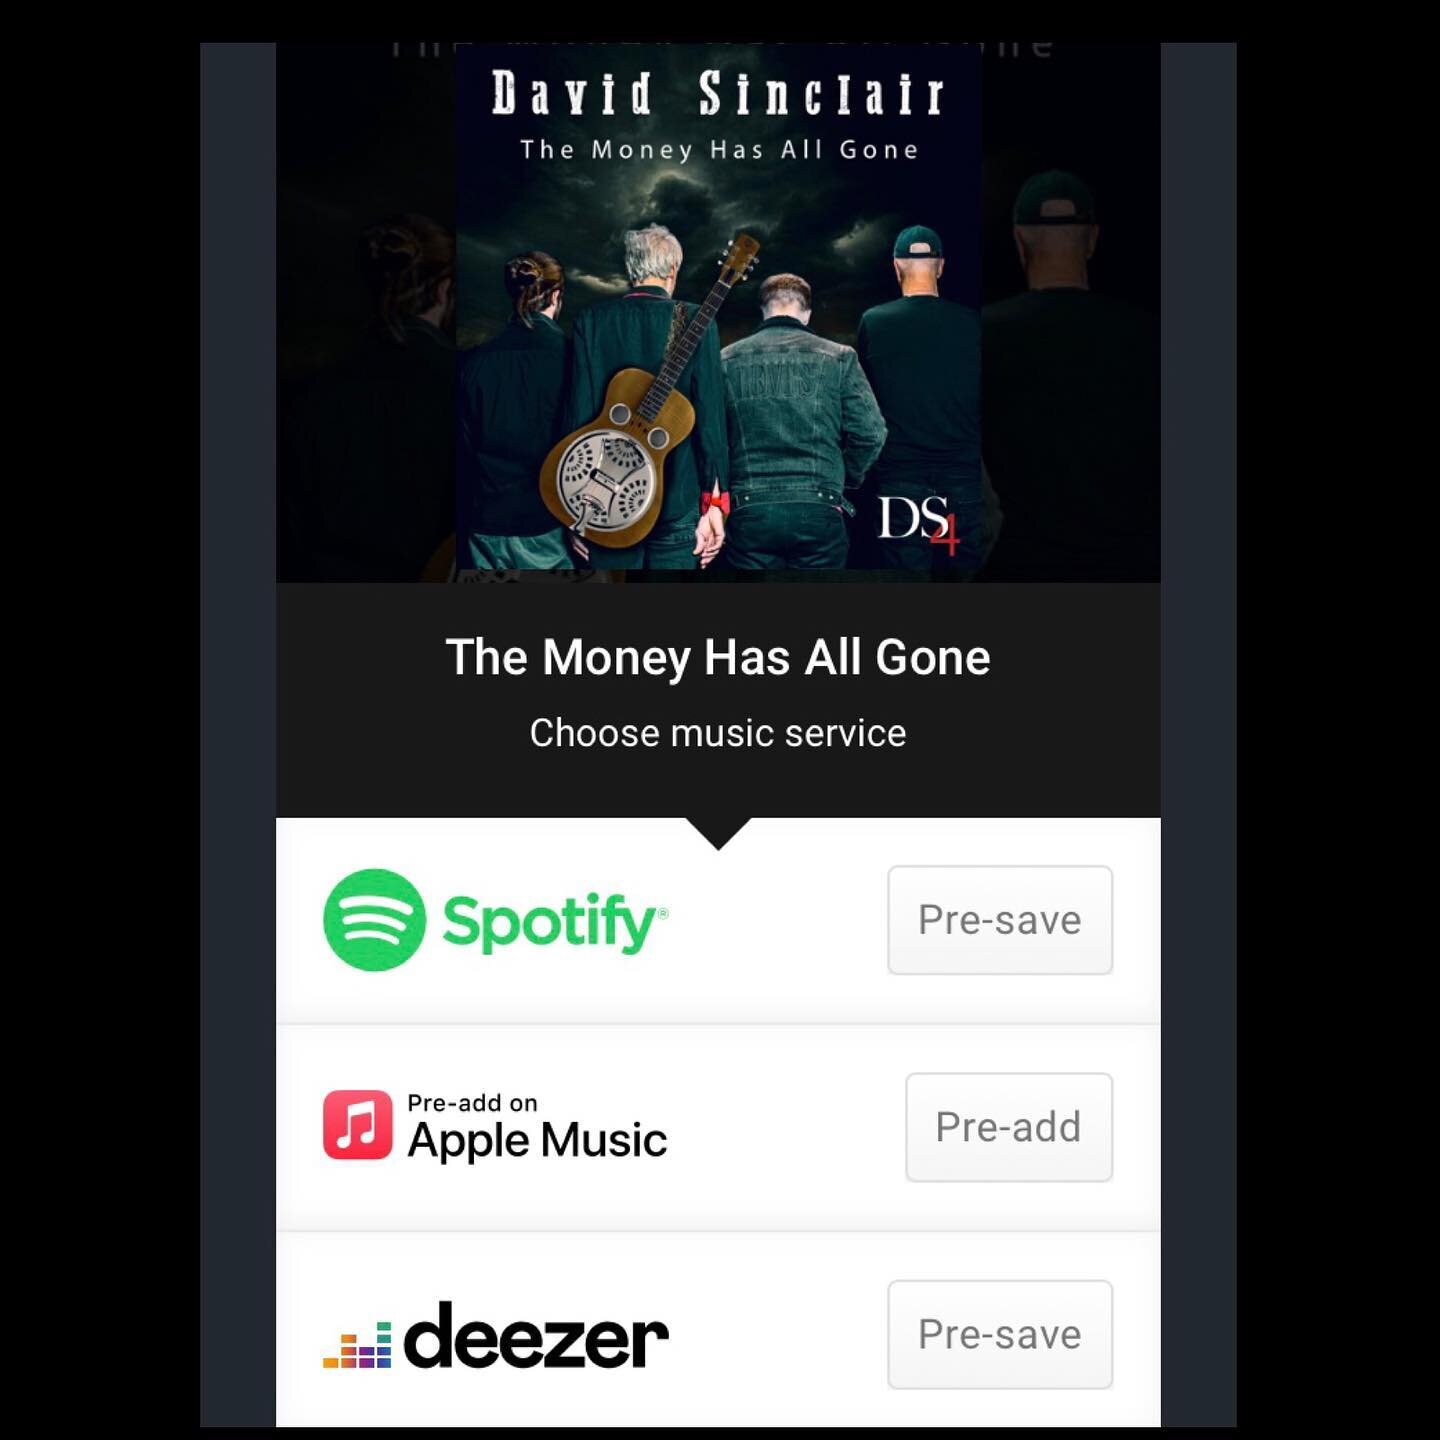 Our next single will drop this Friday, 16 December! 
Please pre-save if you can.
Thank you so much! 

*
*
*
*
#themoneyhasallgone #newsingle #ds4 #presave #spotify #applemusic #deezer #letloosefriday #thanksforyoursupport 🙌